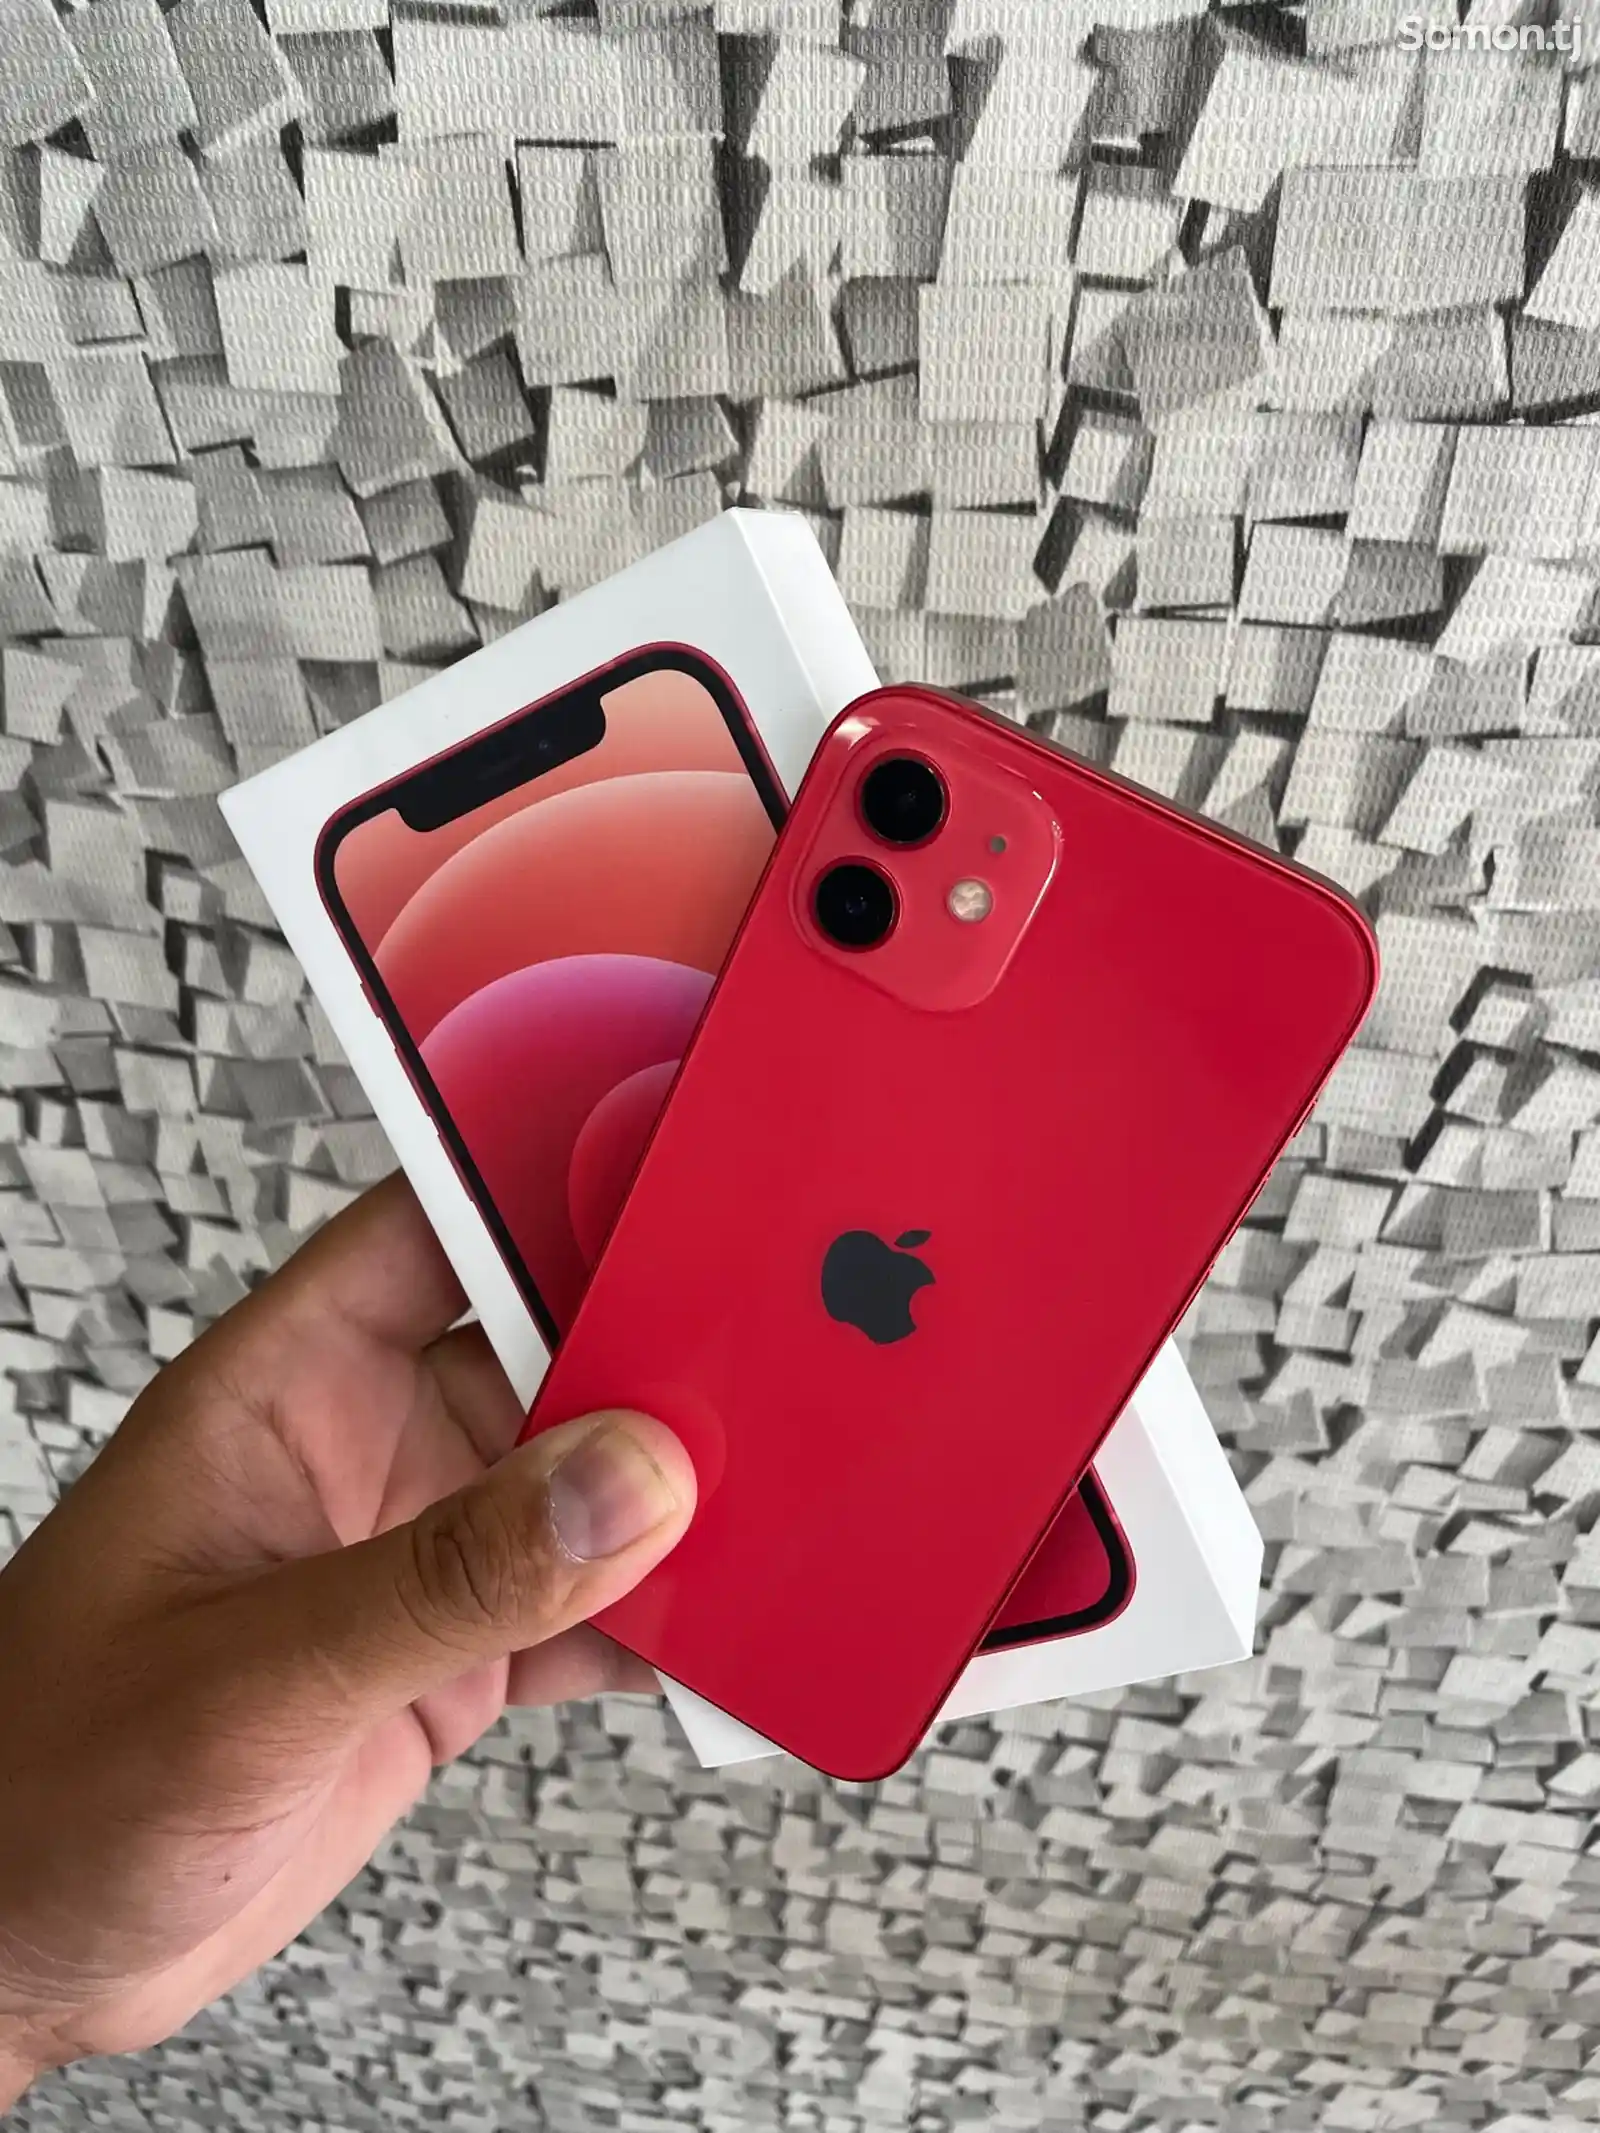 Apple iPhone 12, 64 gb, Product Red